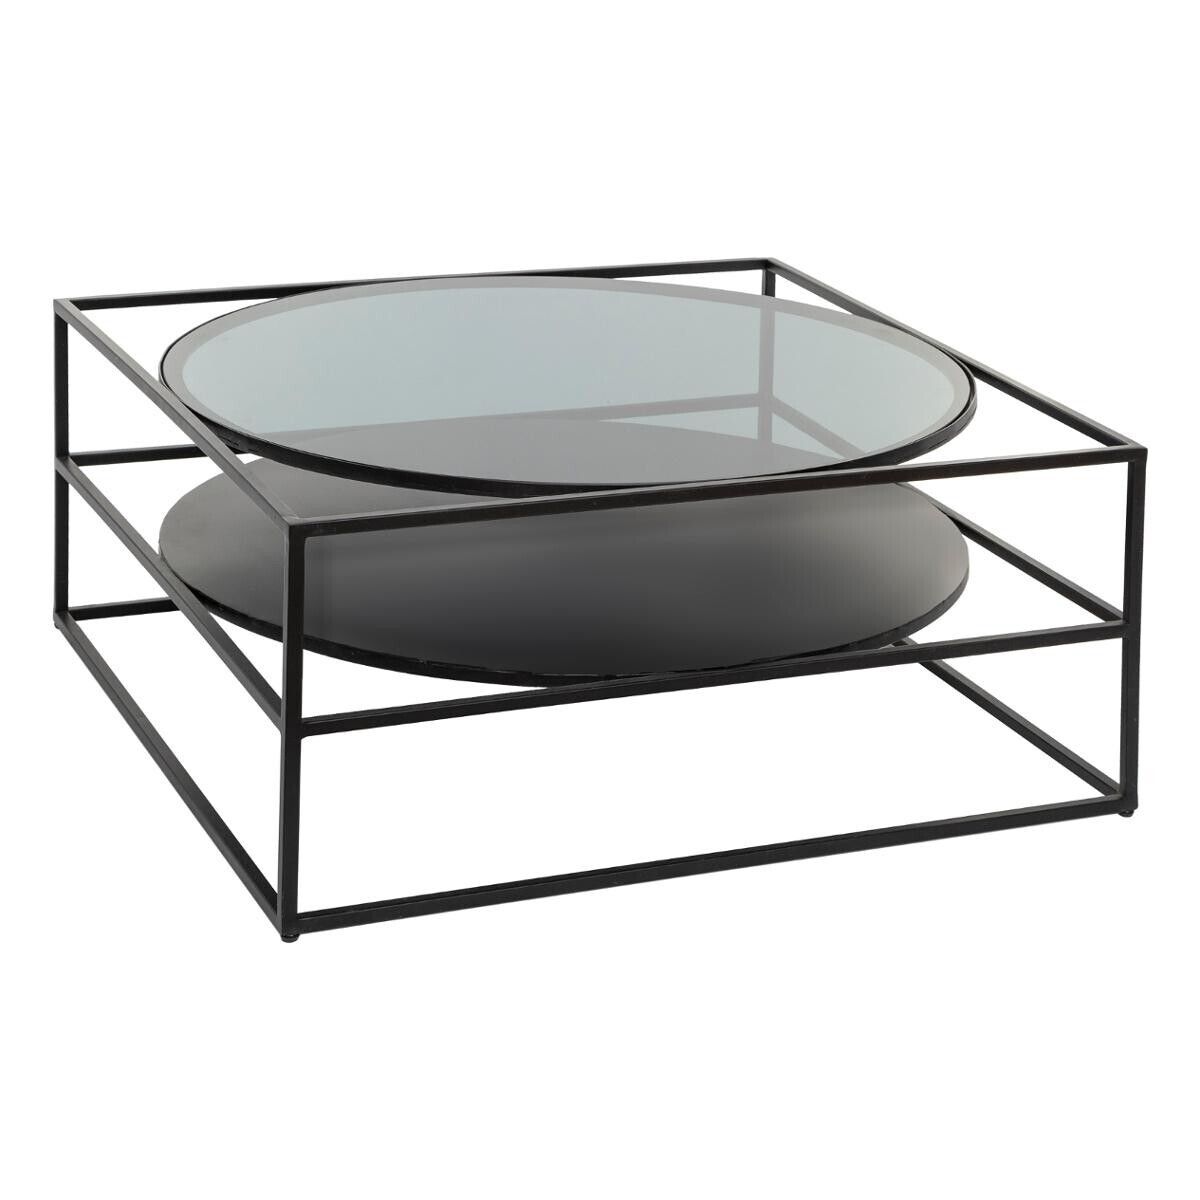 Yoho Coffee Table With Tempered Glass Top 90 X 90 Cm – Atmosphera Official  Website With Regard To Tempered Glass Coffee Tables (View 3 of 15)